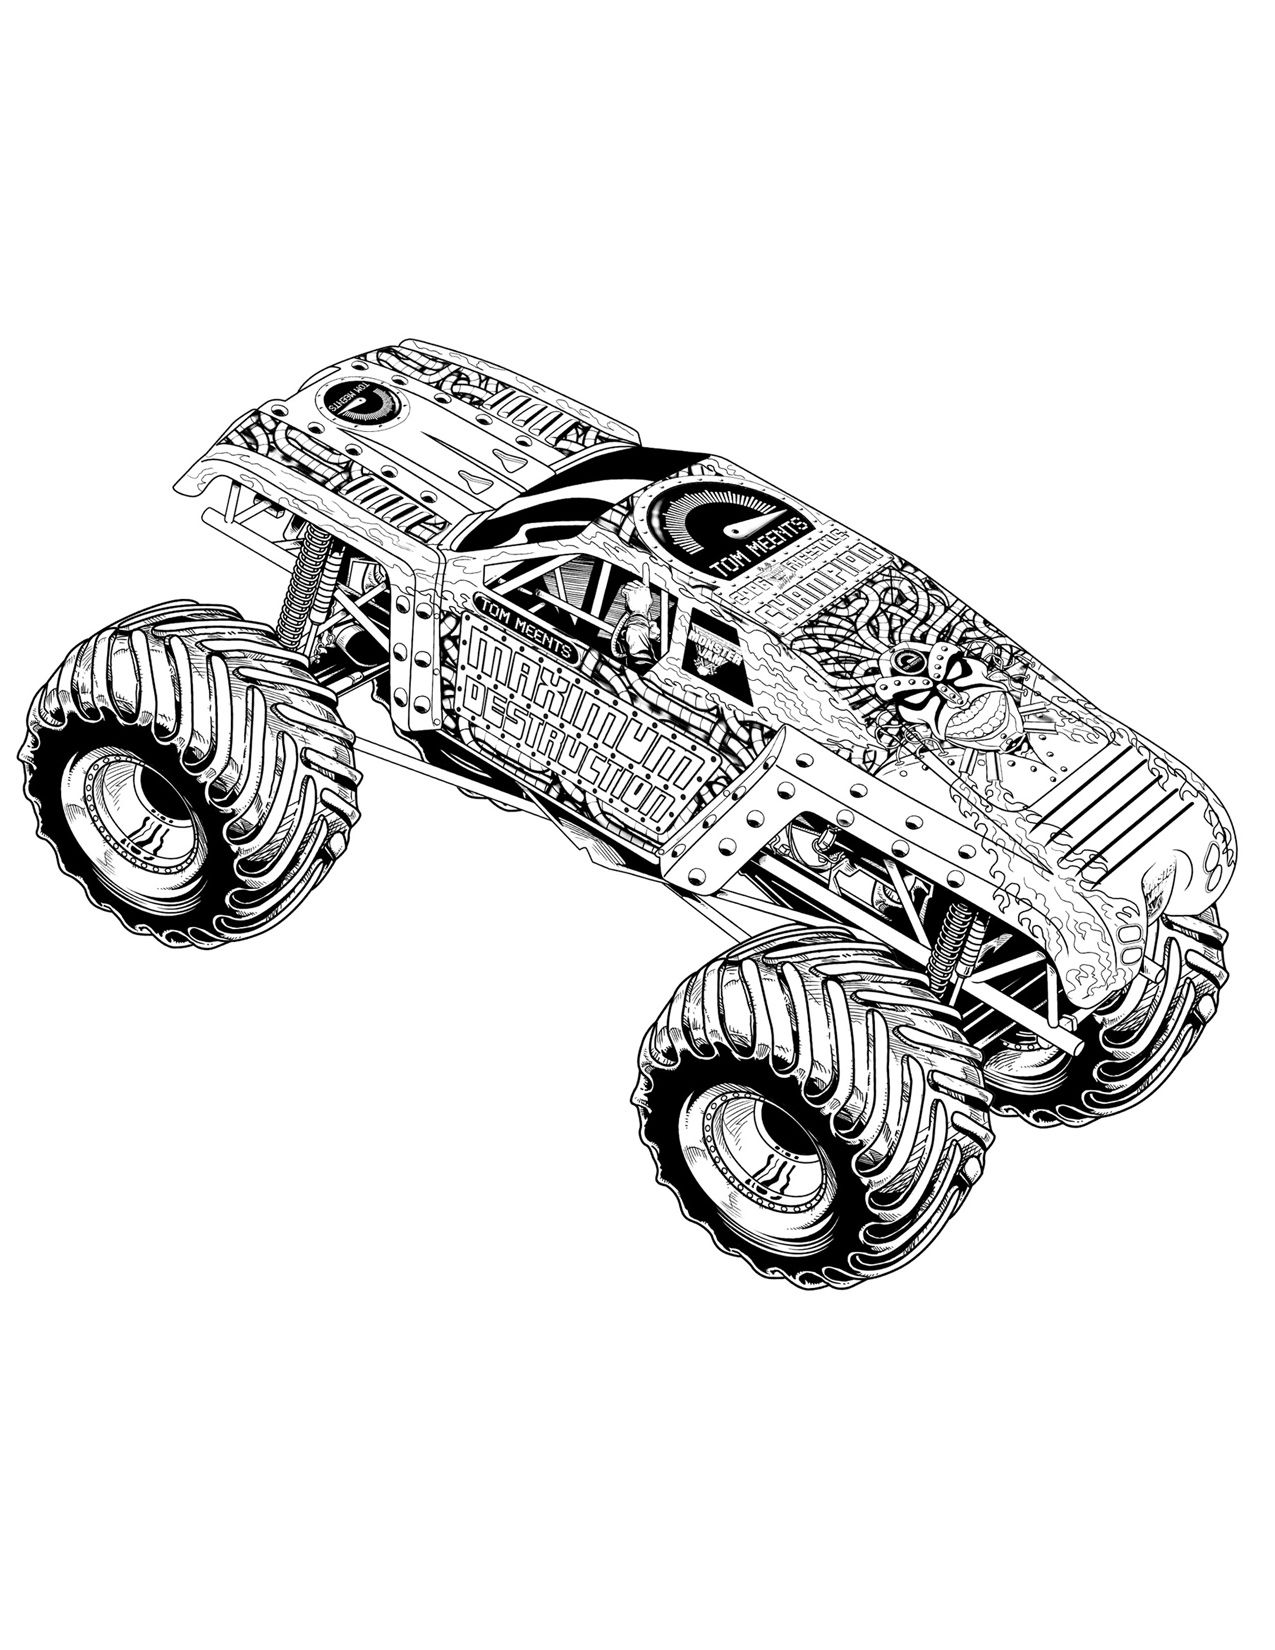 monster truck jam coloring pages